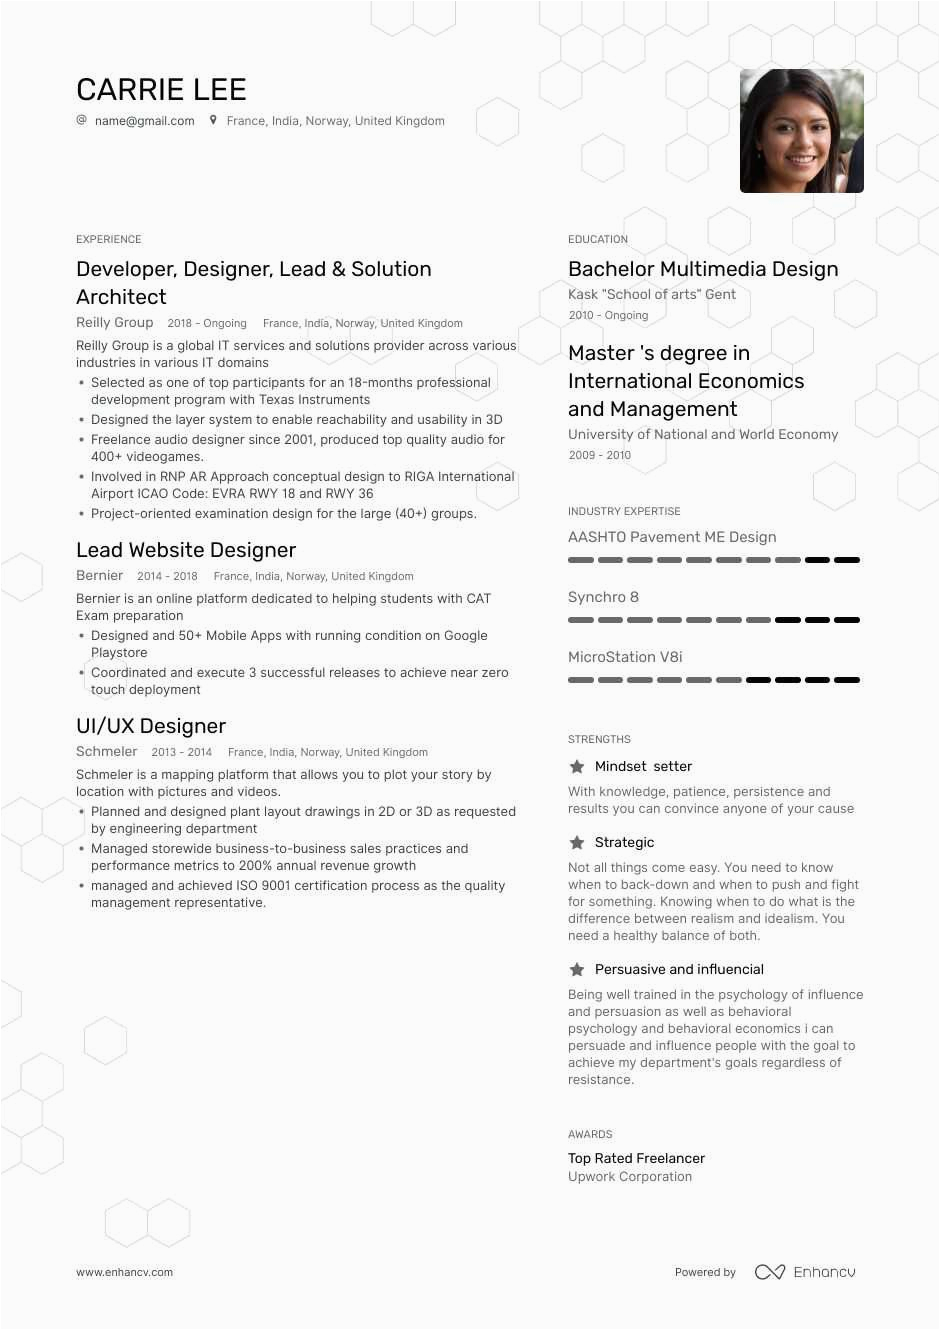 Graphic Designer Resume About Me Sample top Graphic Designer Resume Examples & Samples for 2020